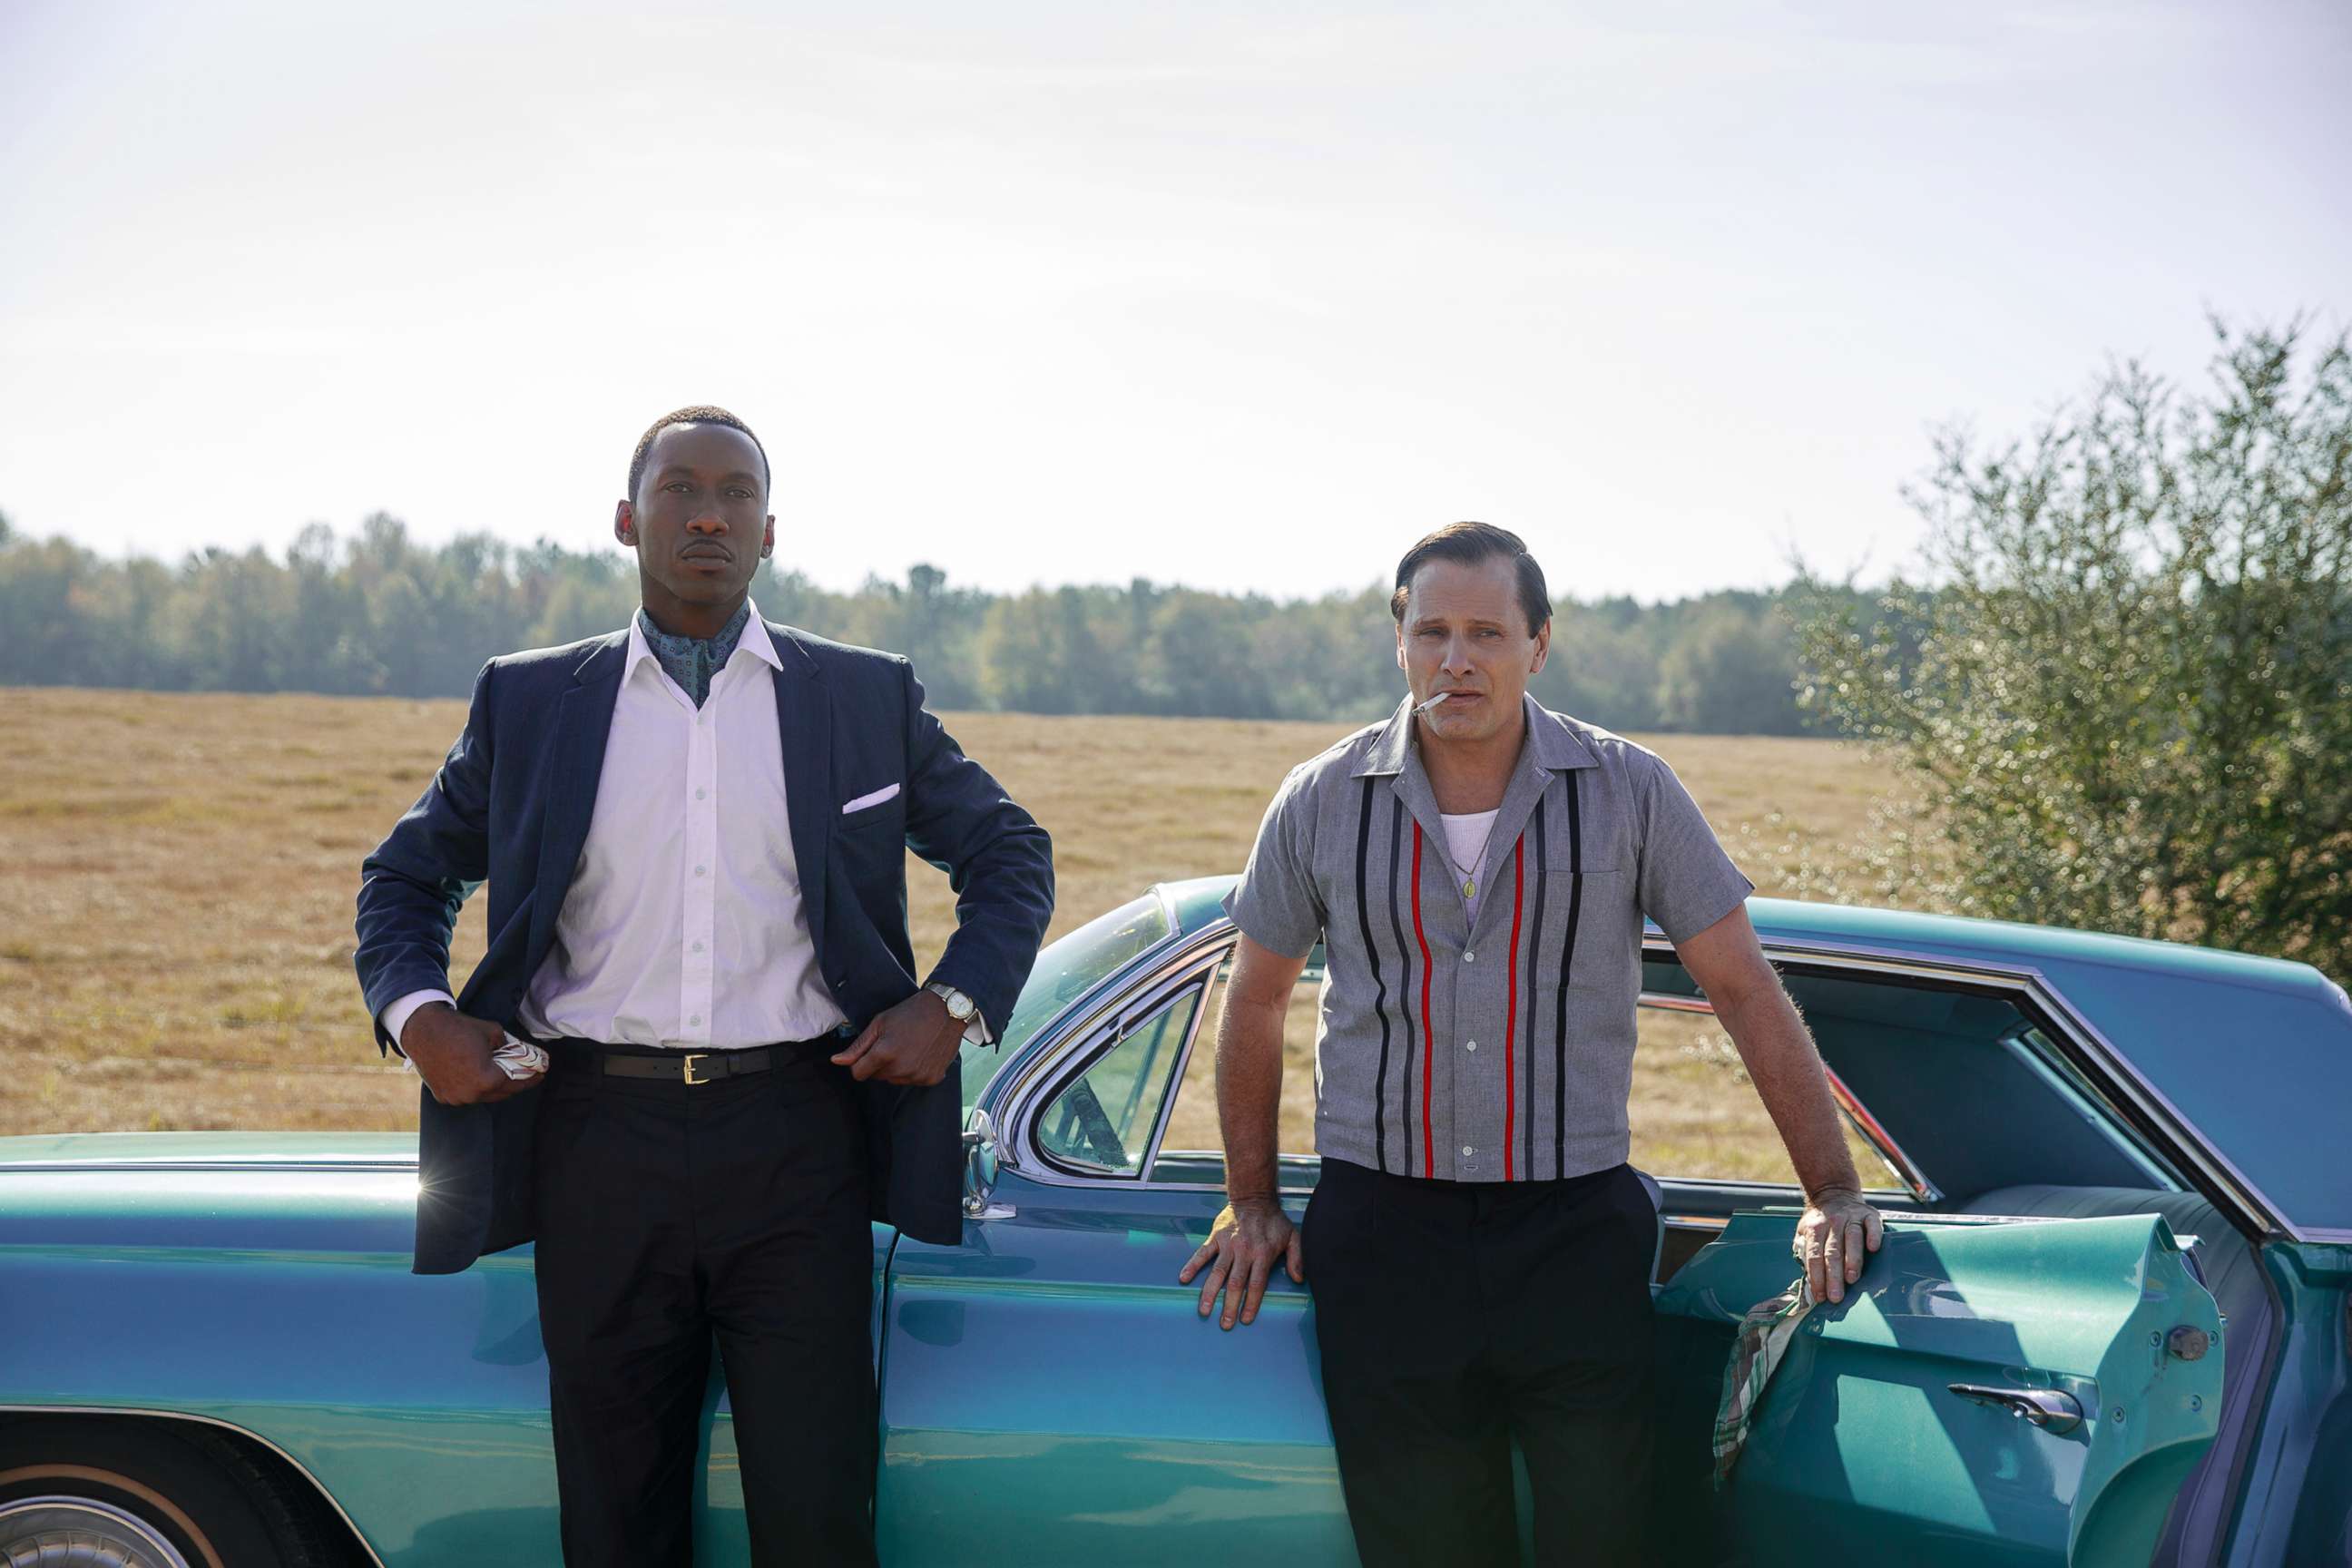 PHOTO: Mahershala Ali as Dr. Donald Shirley and Viggo Mortensen as Tony Vallelonga in "Green Book," directed by Peter Farrelly.